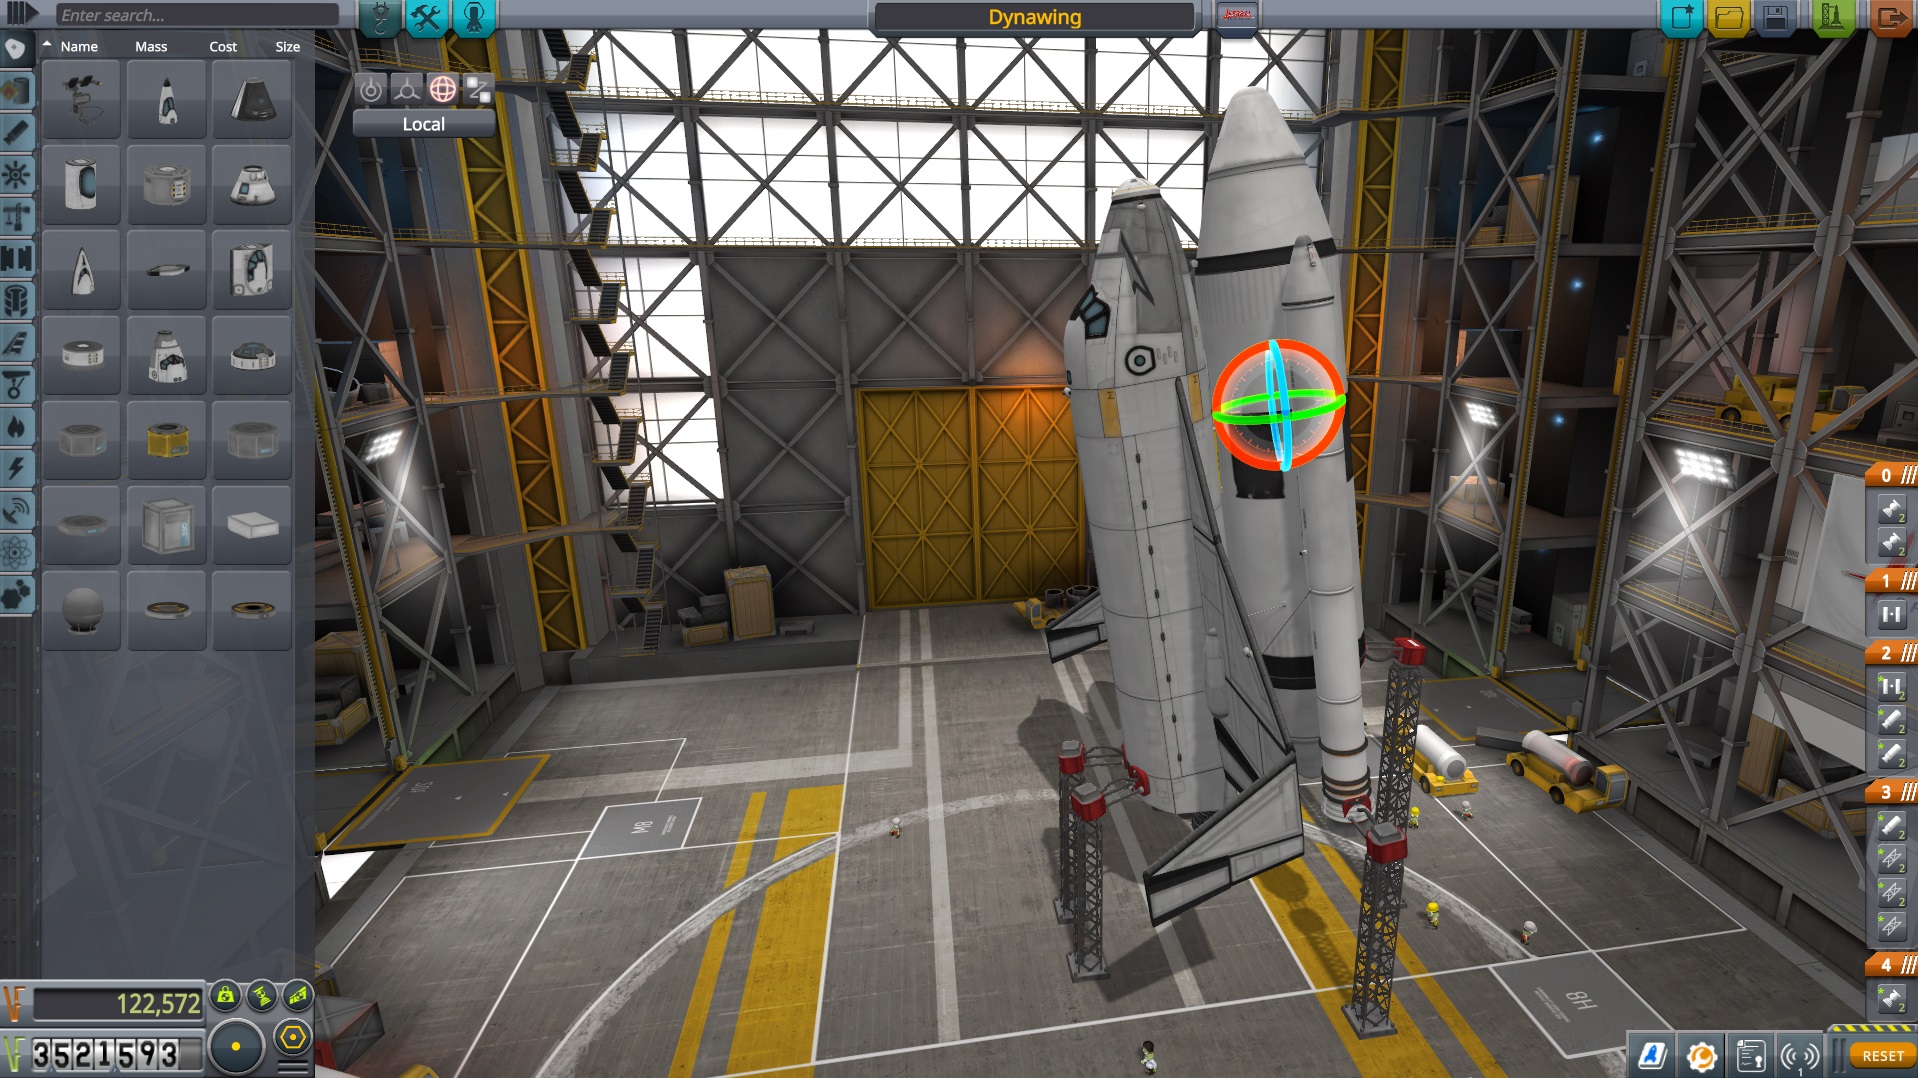 A space rocket is in a hangar, with an interface open on the left, showing customization options for the rocket